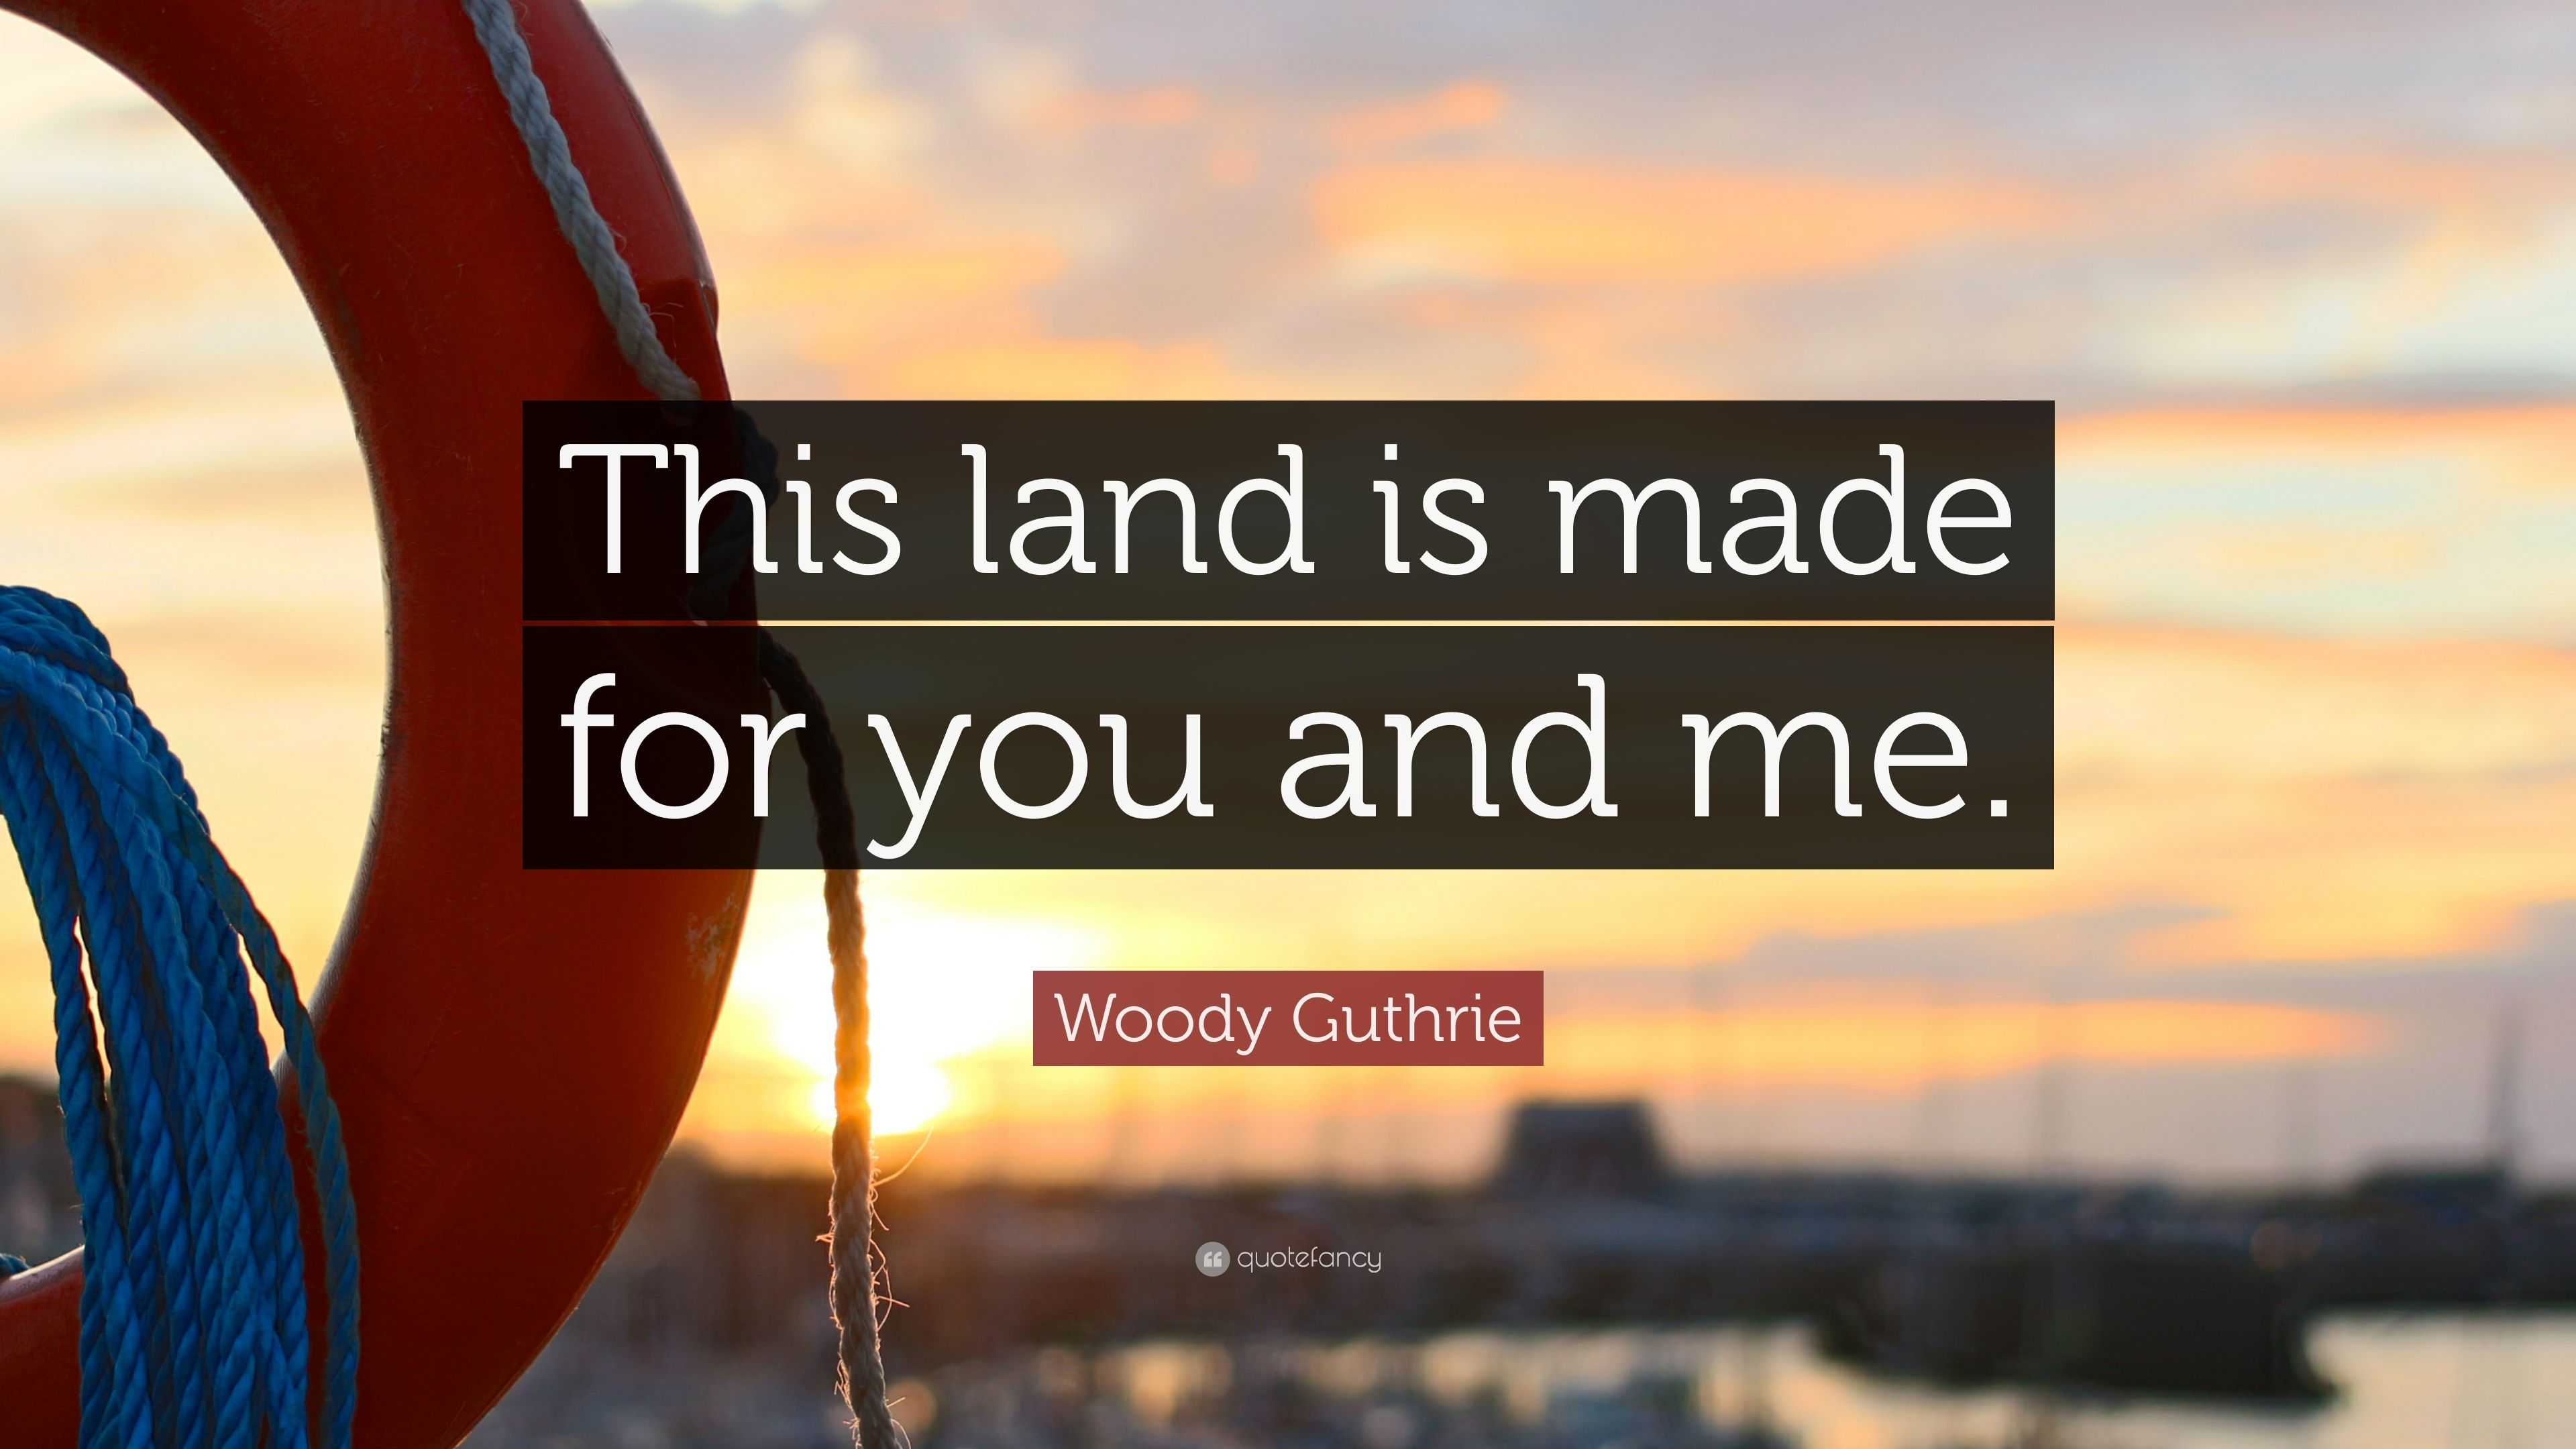 This Land Was Made for You and Me by Elizabeth Partridge